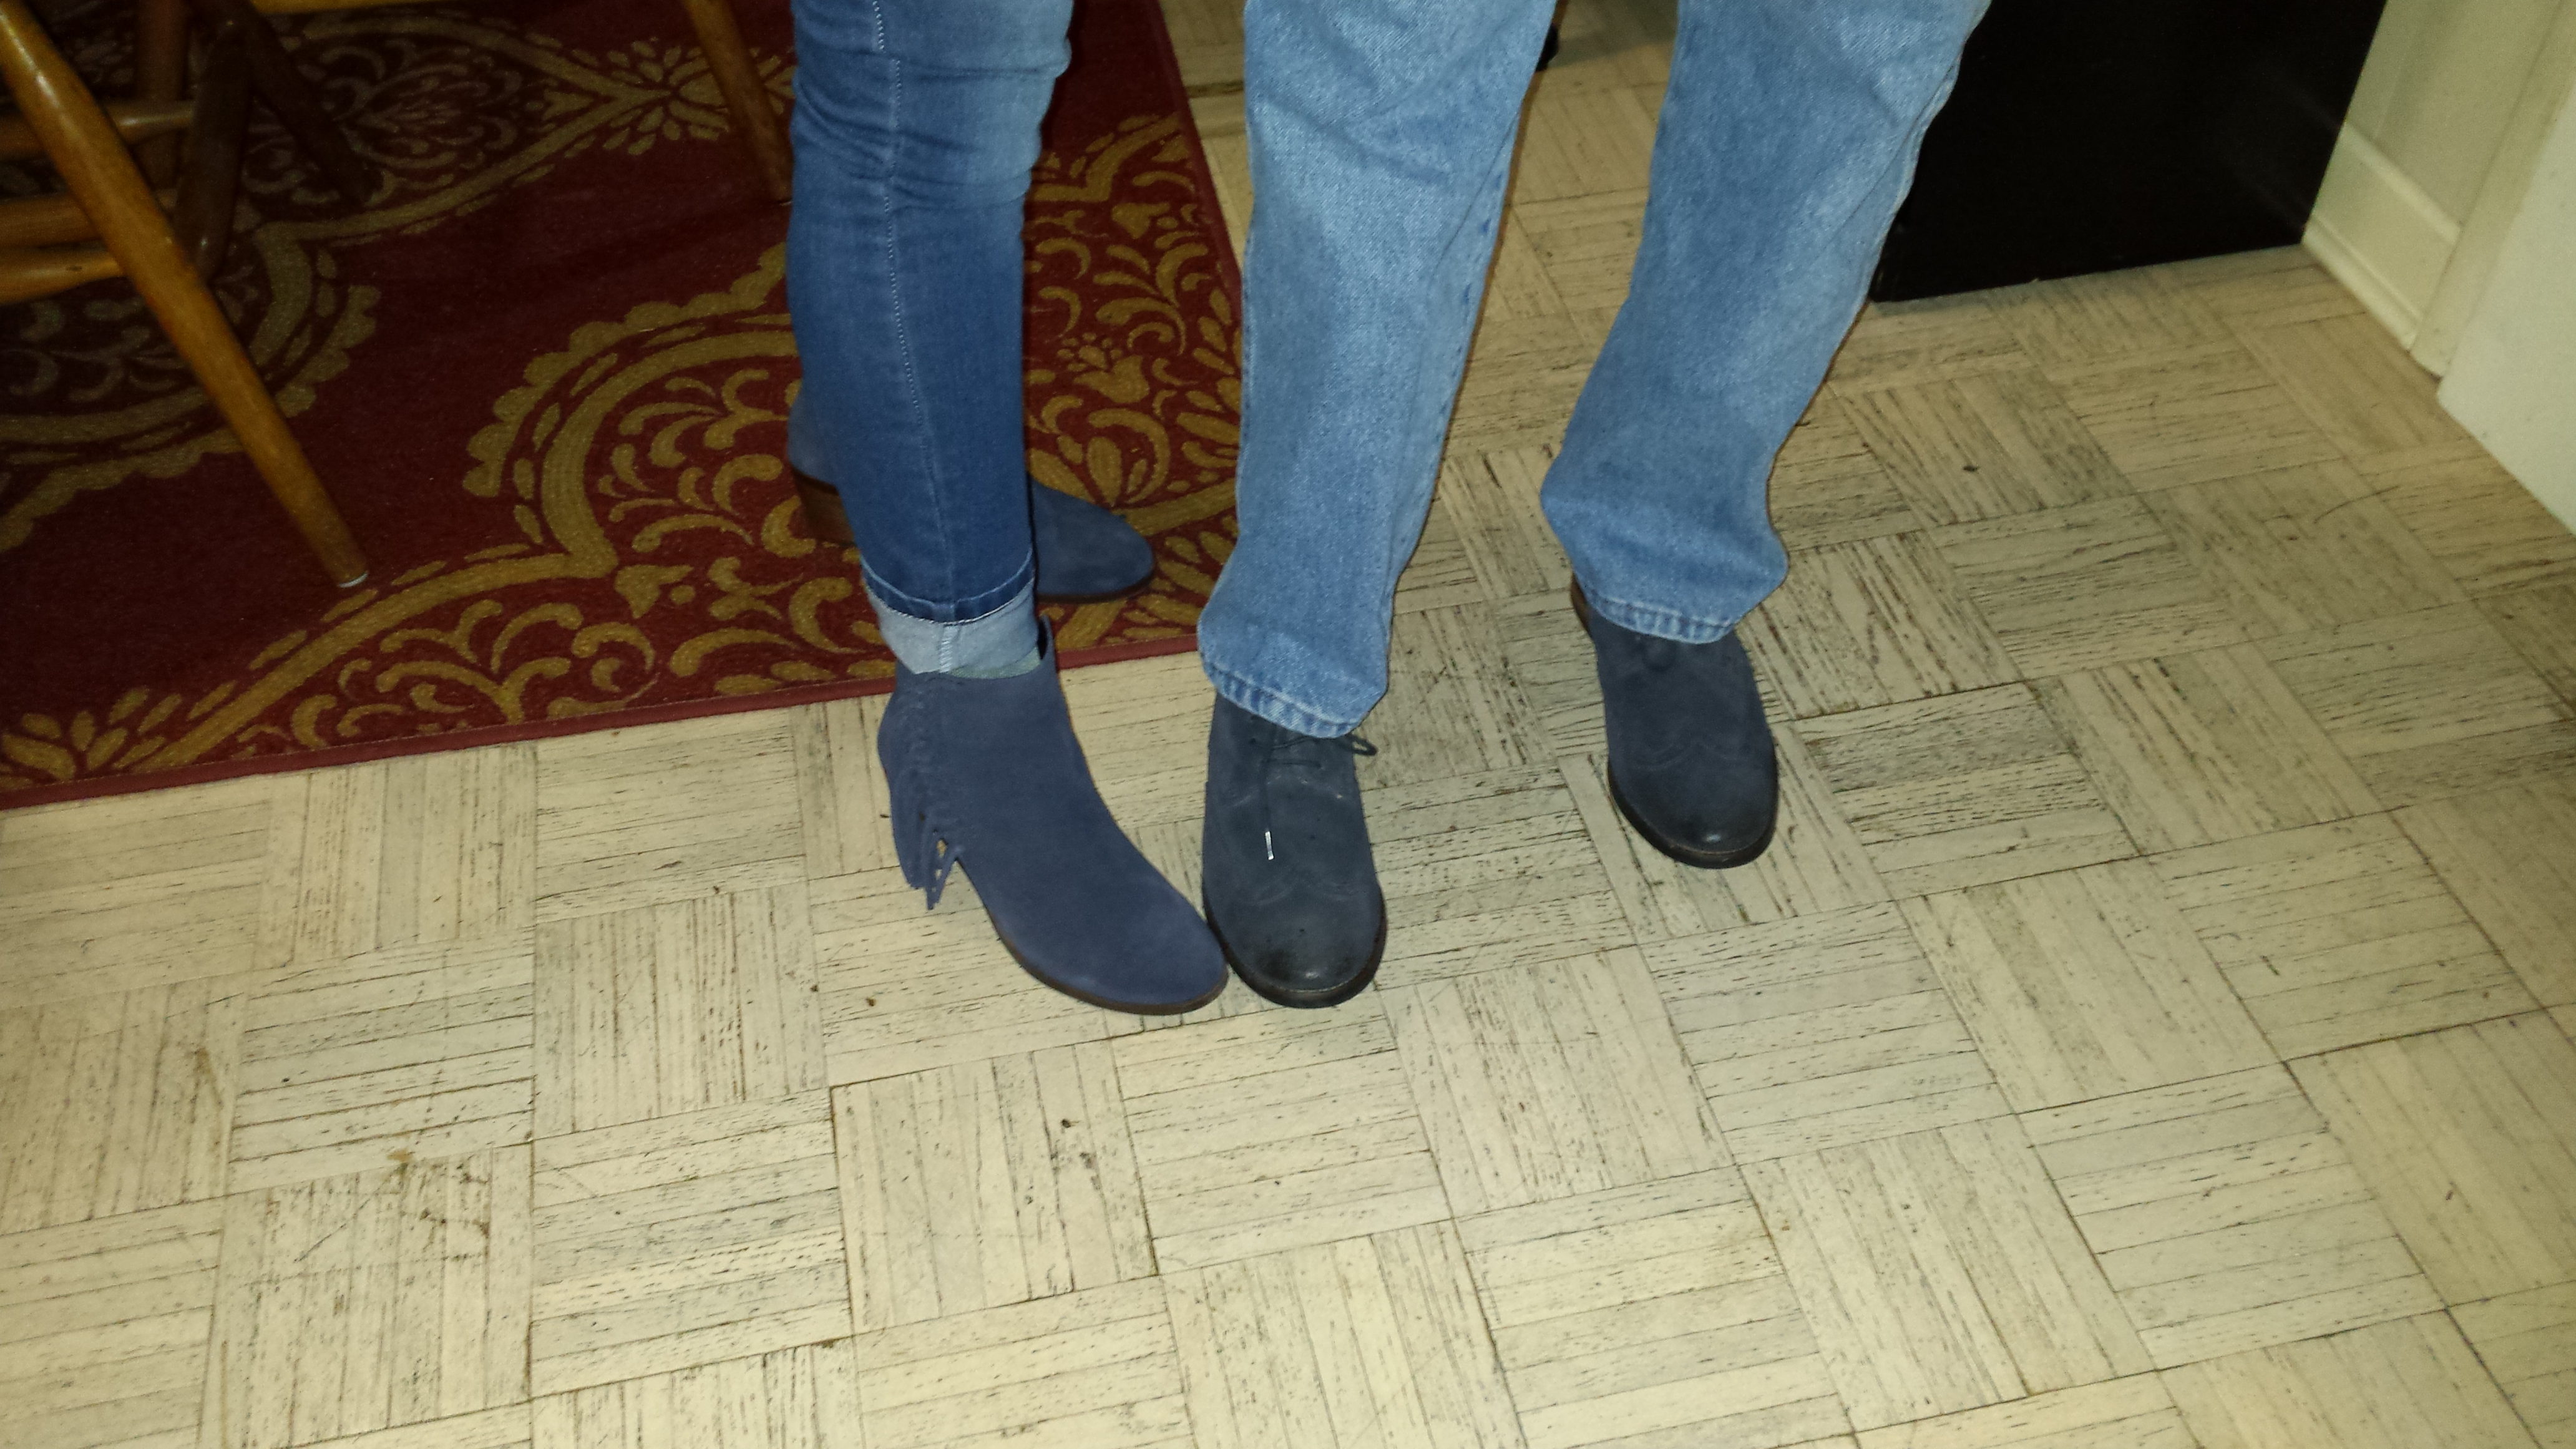 Who wears blue suede shoes?